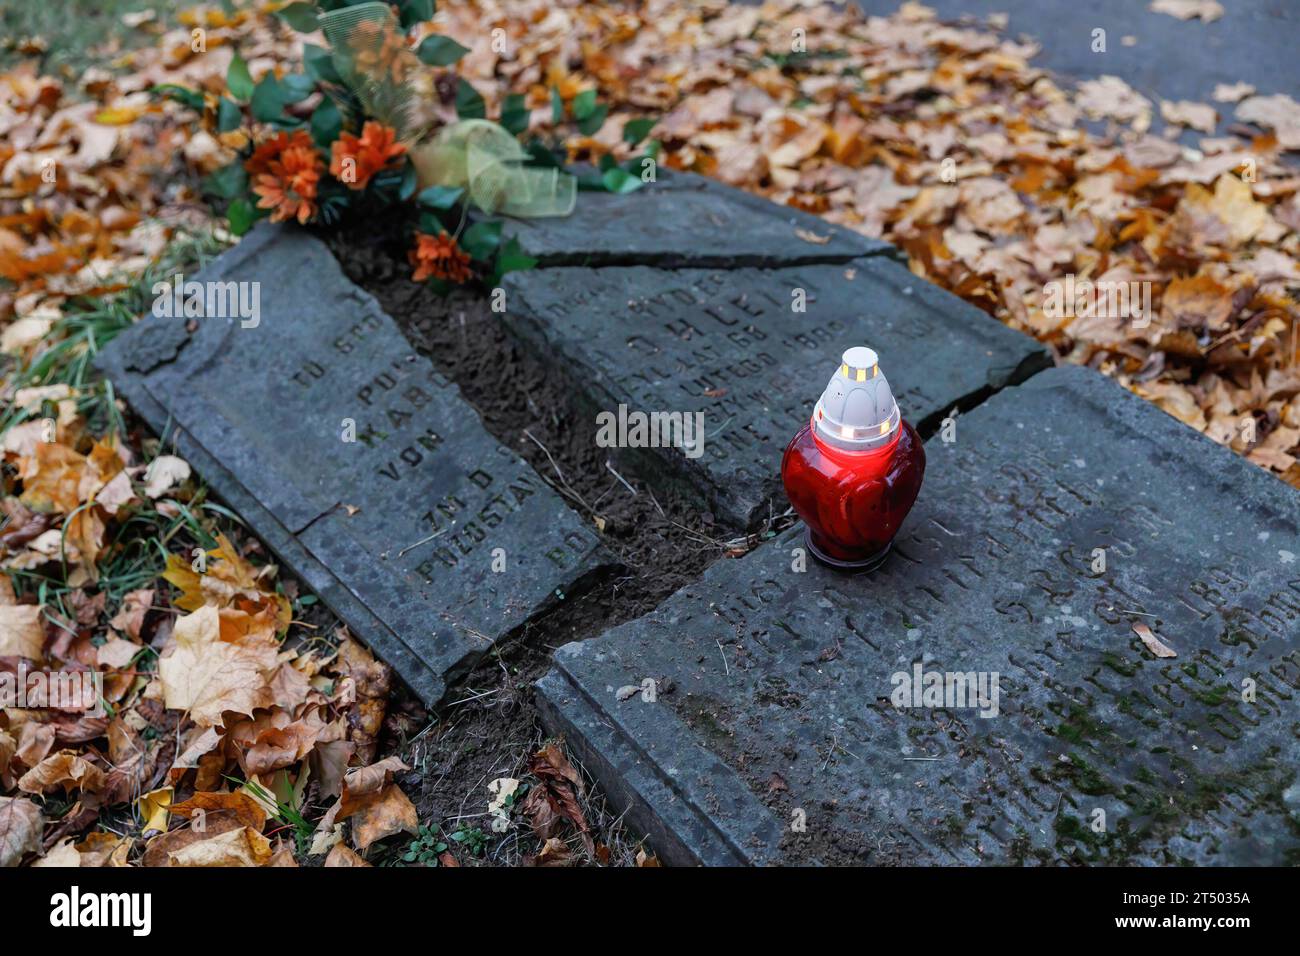 A candle in a lantern stands on a broken tombstone on All Saints' Day at the Evangelical-Augsburg Cemetery in Warsaw. All Saints' Day (or Dzie? Zaduszny in Polish) is a public holiday in Poland. It is an opportunity to remember deceased relatives. On this day, people bring flowers, typically chrysanthemums, and candles to cemeteries. The entire cemetery is filled with lights in the darkness. The Evangelical-Augsburg Cemetery is a historic Lutheran Protestant cemetery located in the western part of Warsaw. Since its opening in 1792, more than 100,000 people have been buried there. (Photo by Vol Stock Photo